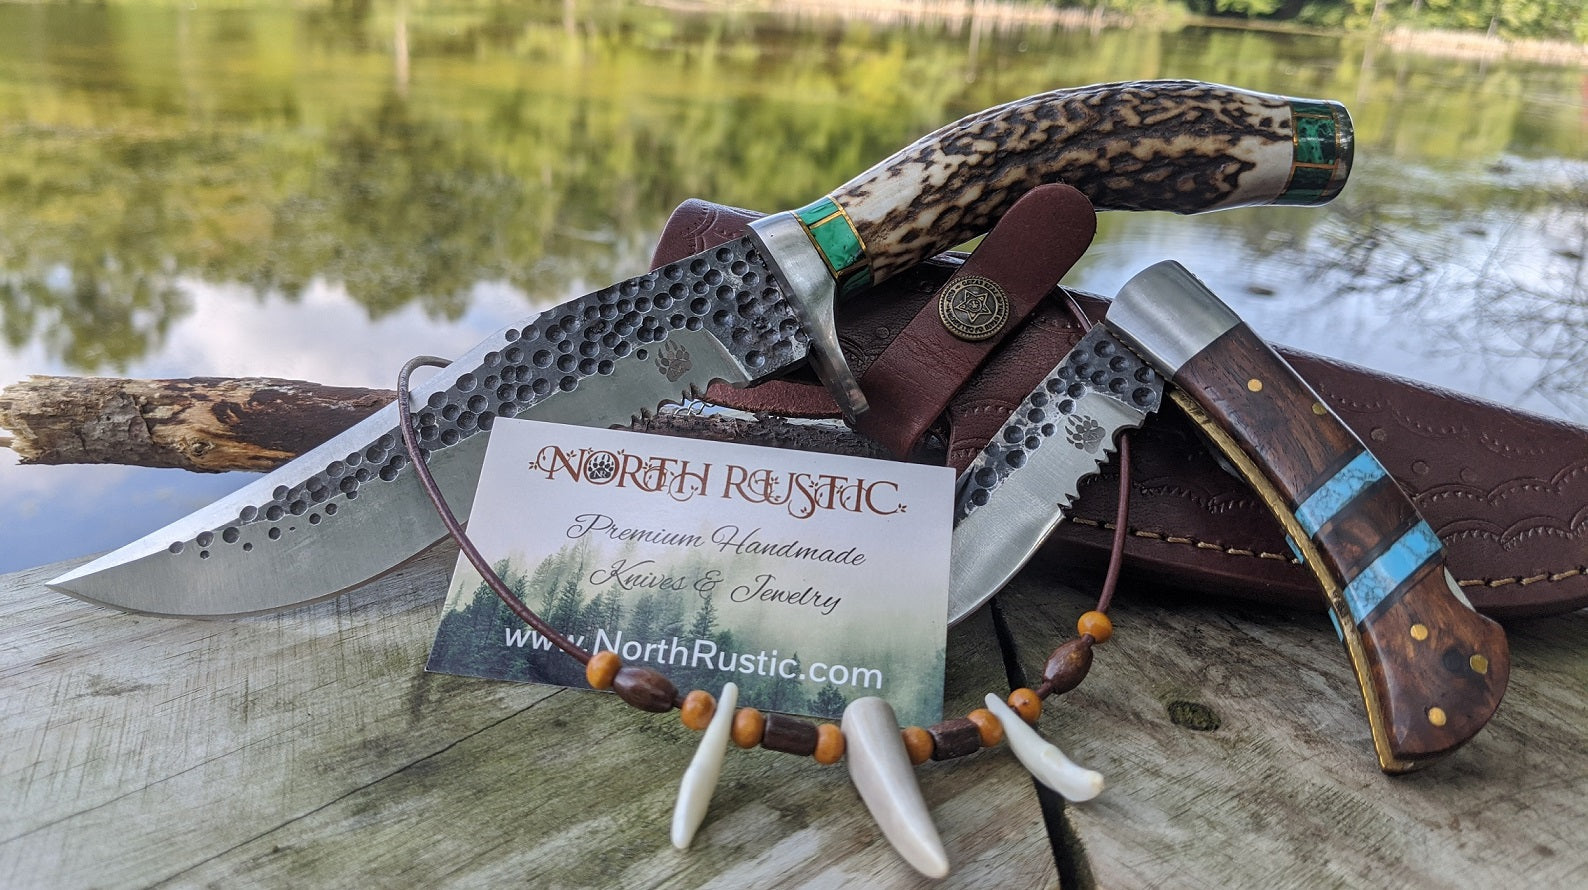 Make The Holidays Special With An Engraved Knife From NorthRustic.com